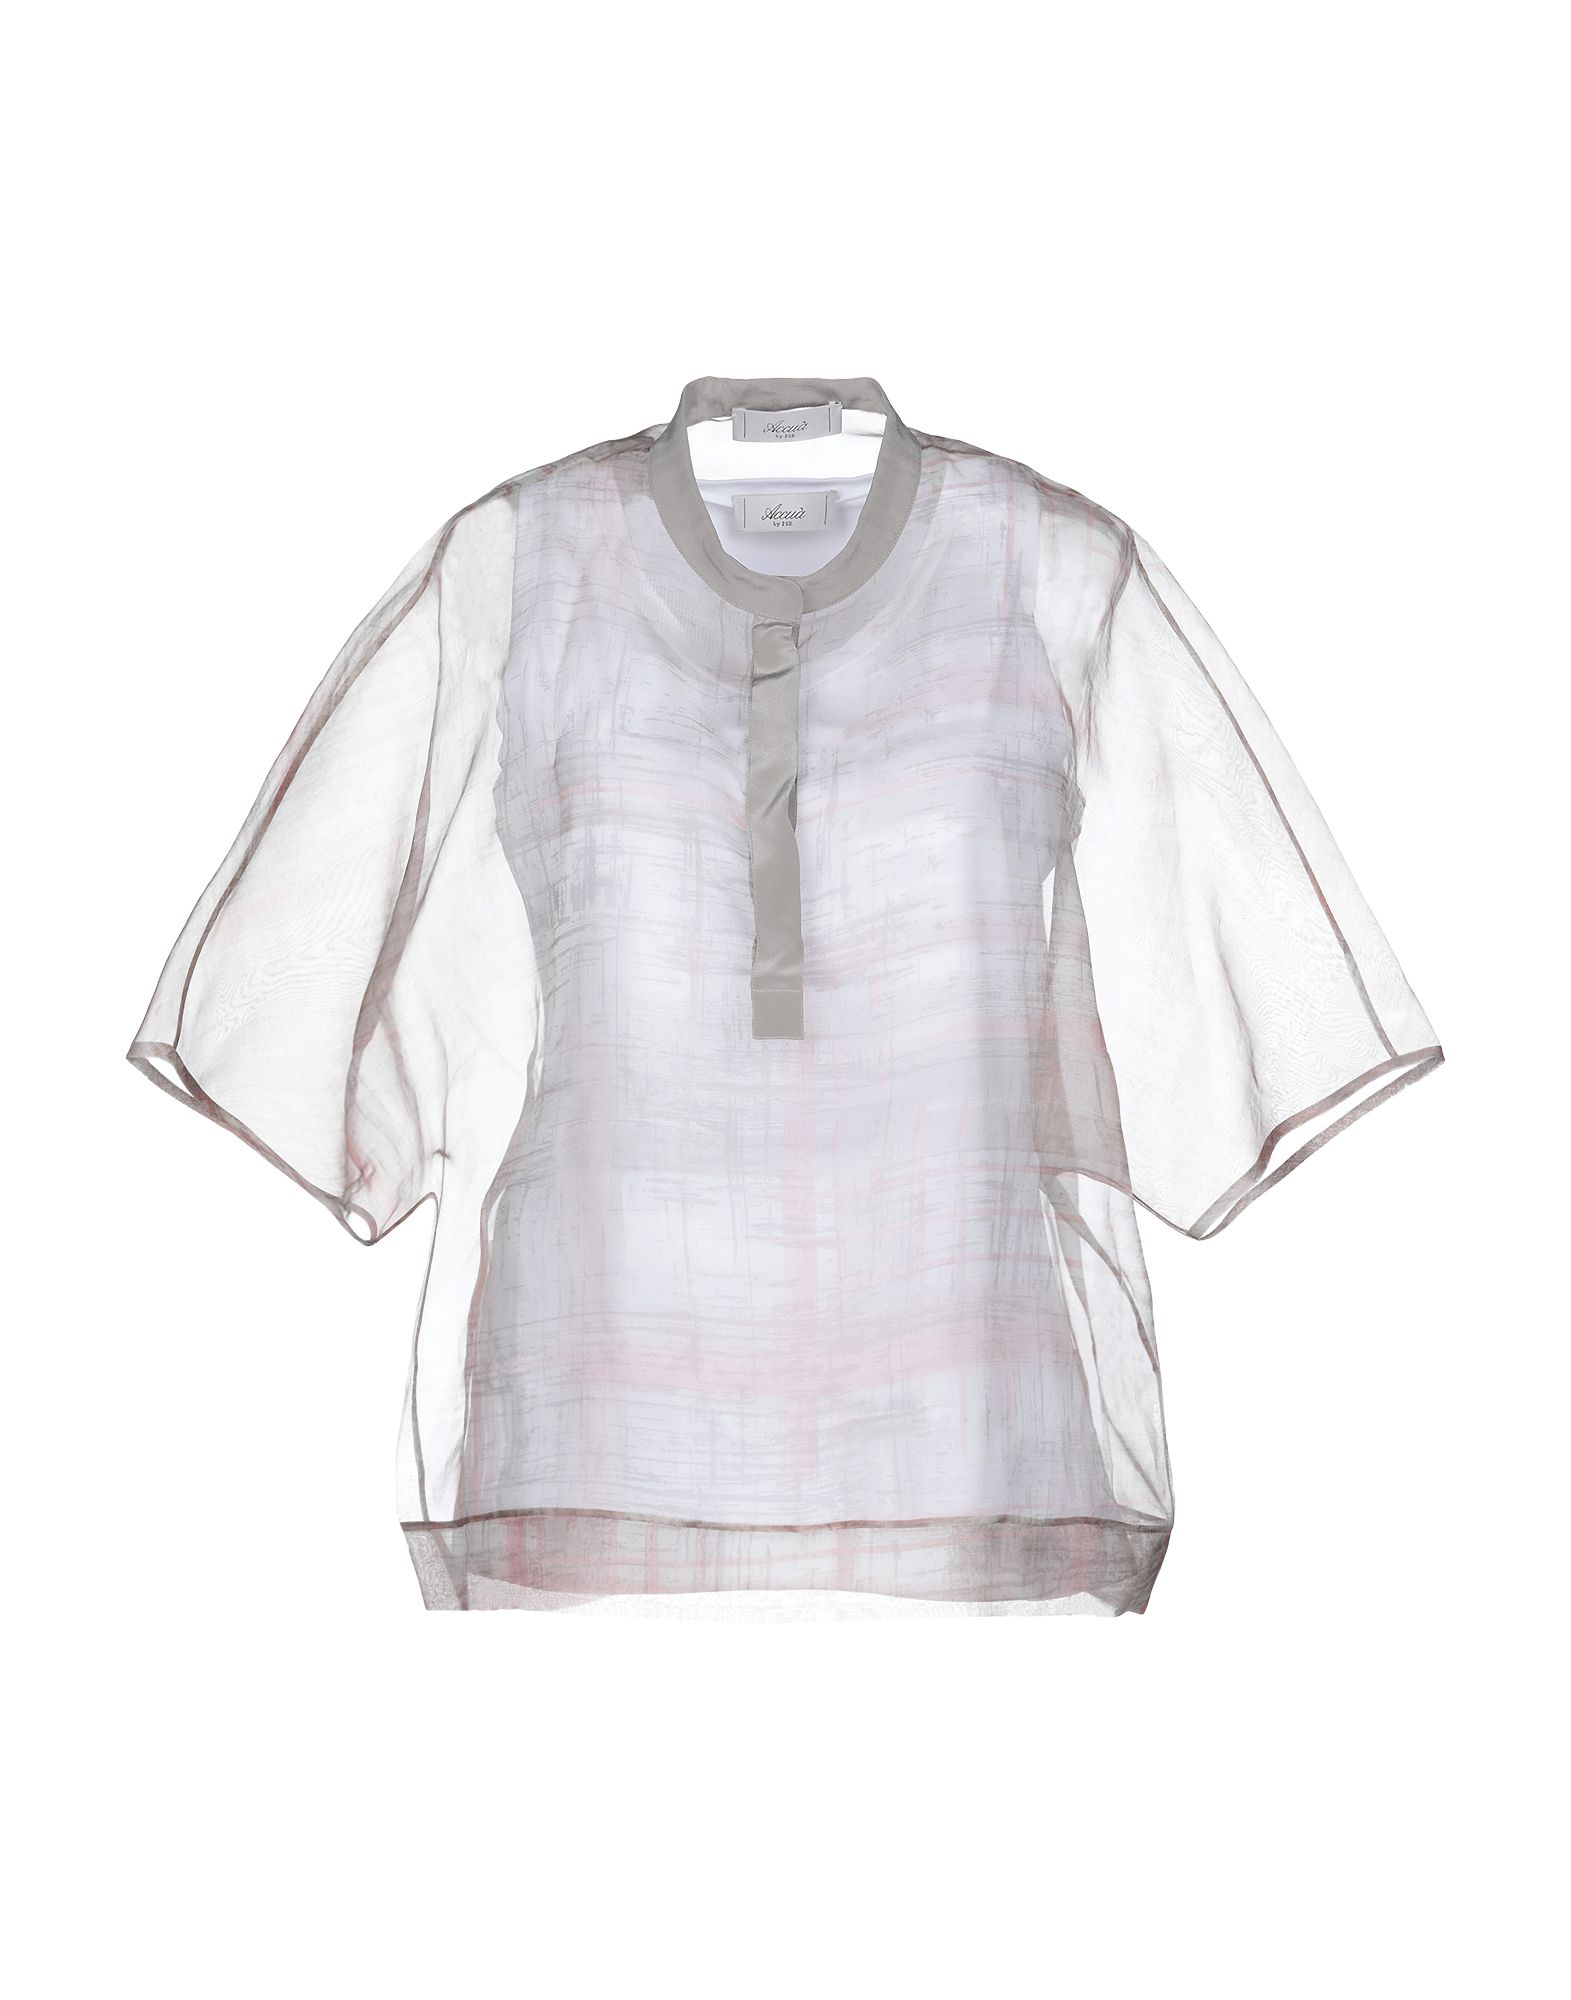 Accuà By Psr Blouses In Light Grey